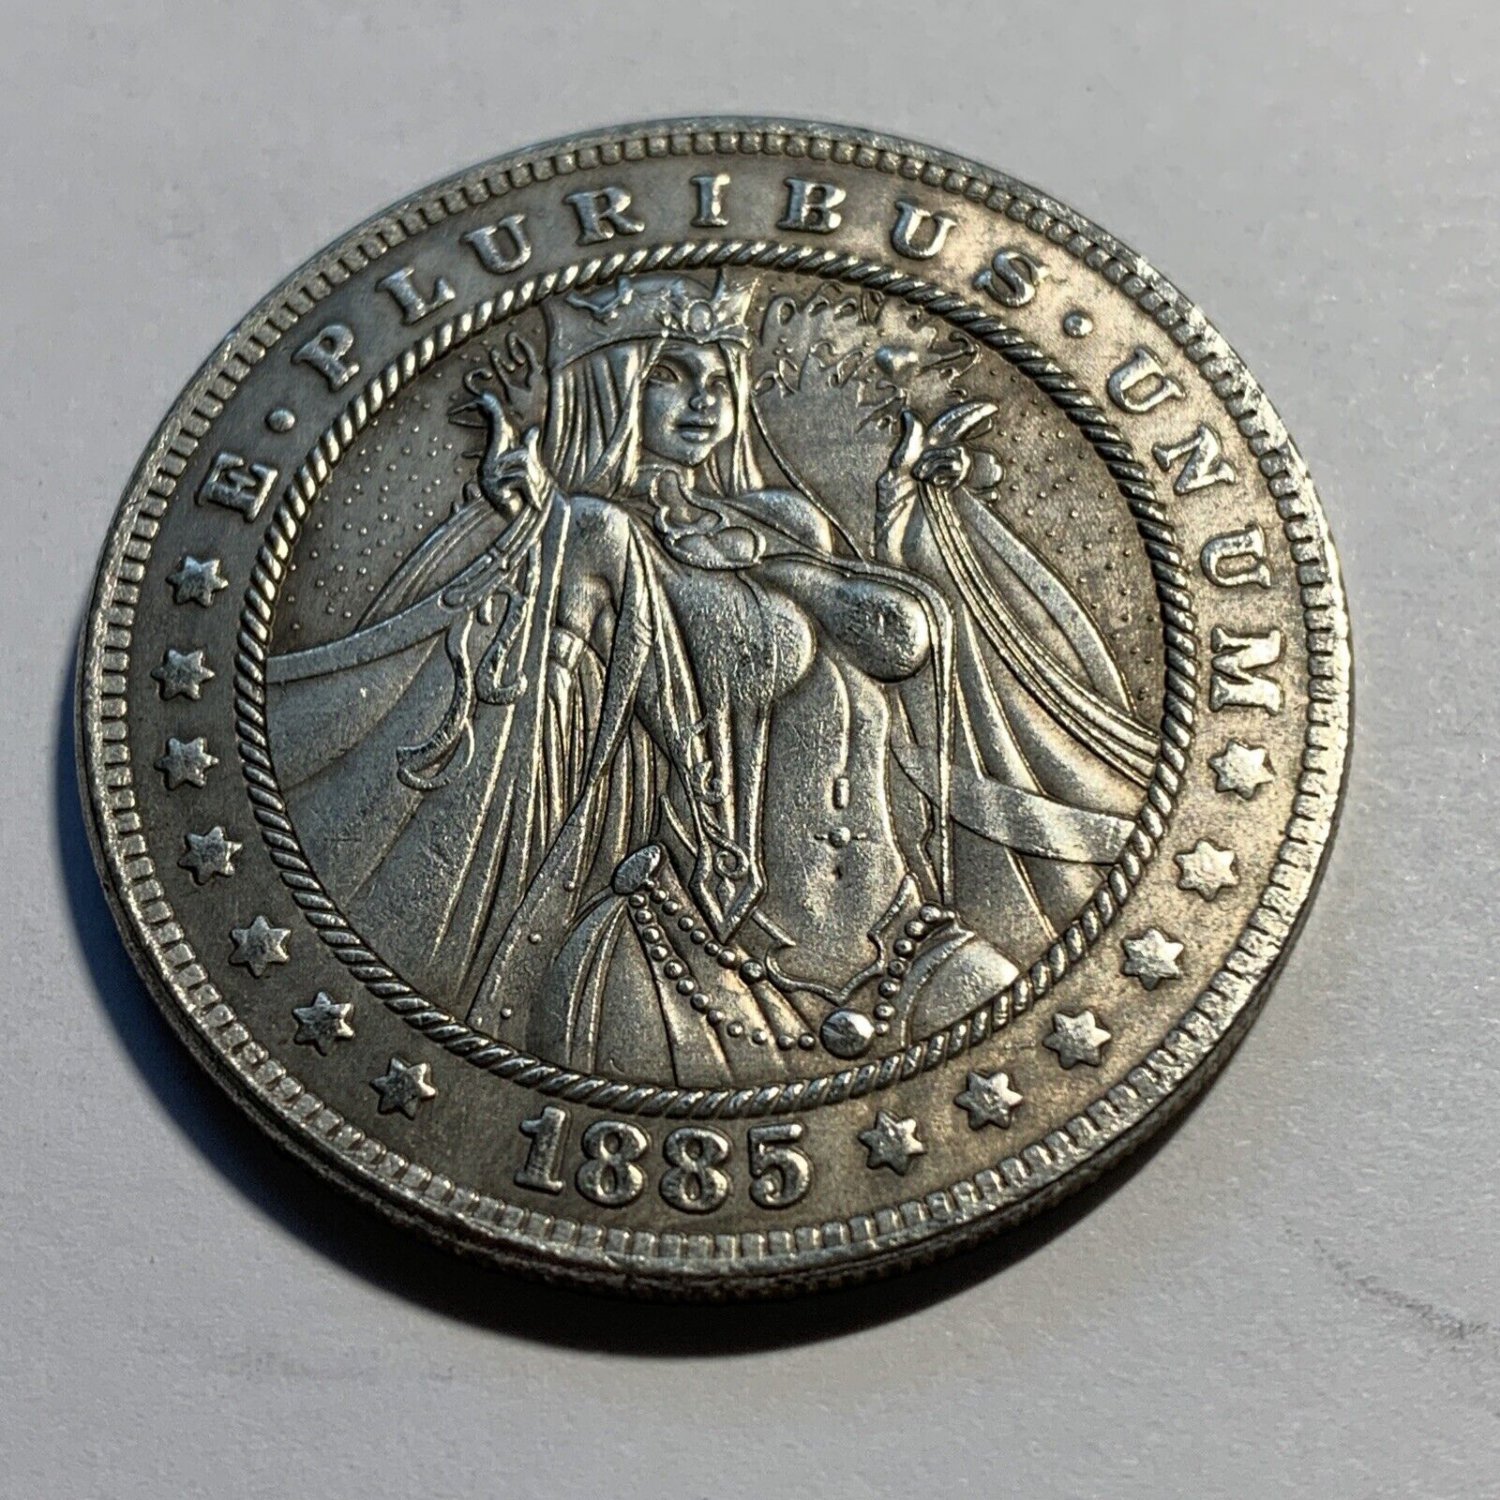 Sexy Queen Has Arrived Novelty Good Luck Heads Tails Challenge Coin 6022